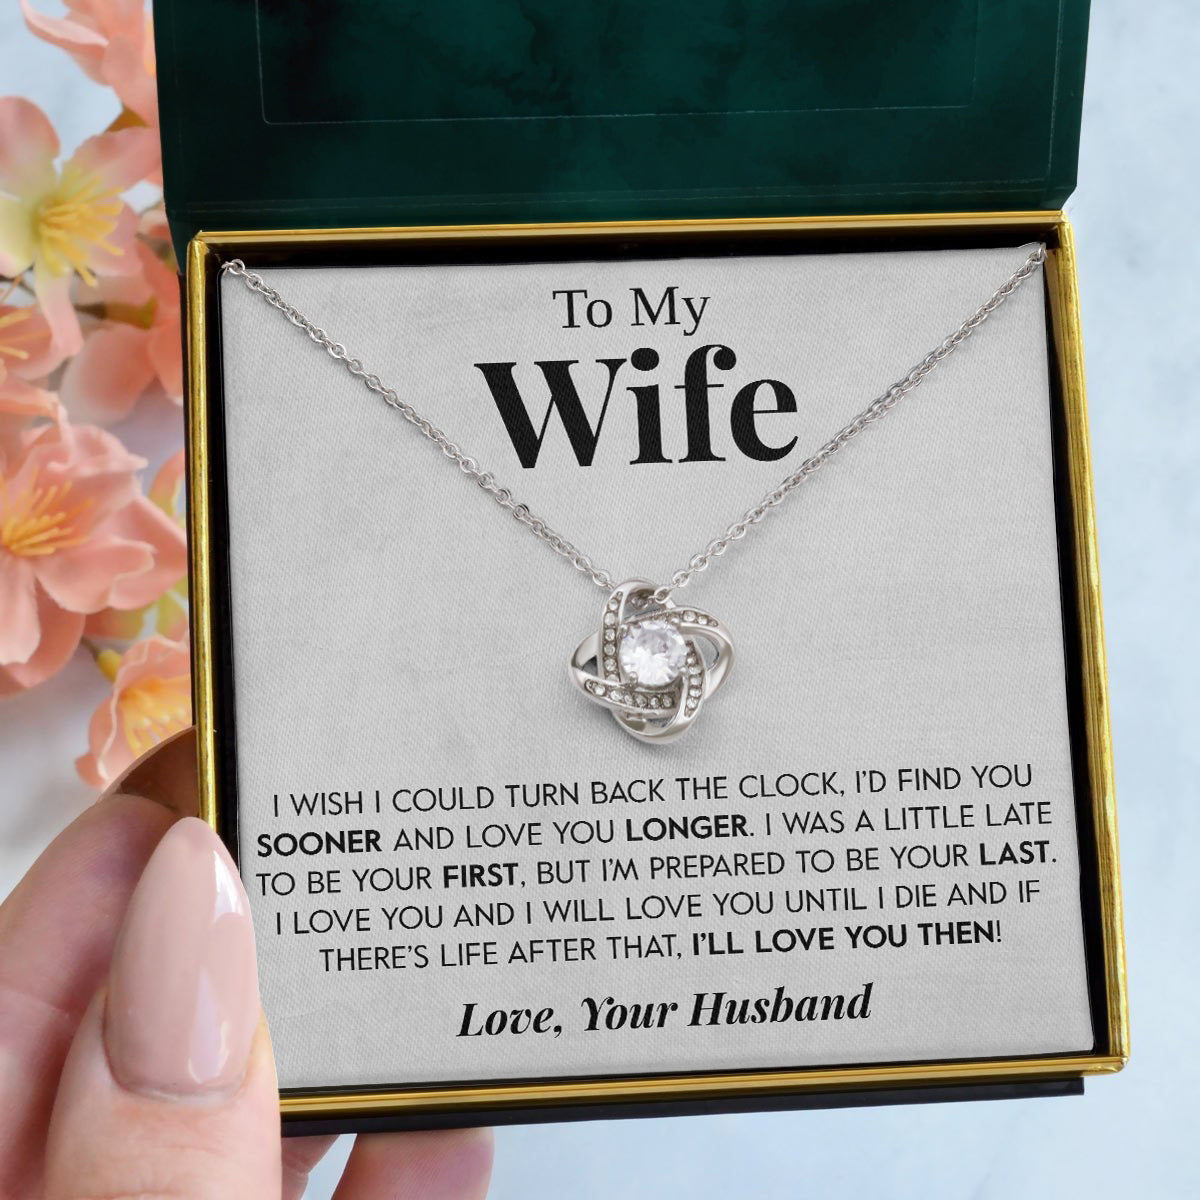 To My Wife | "Turn Back the Clock" | Love Knot Necklace